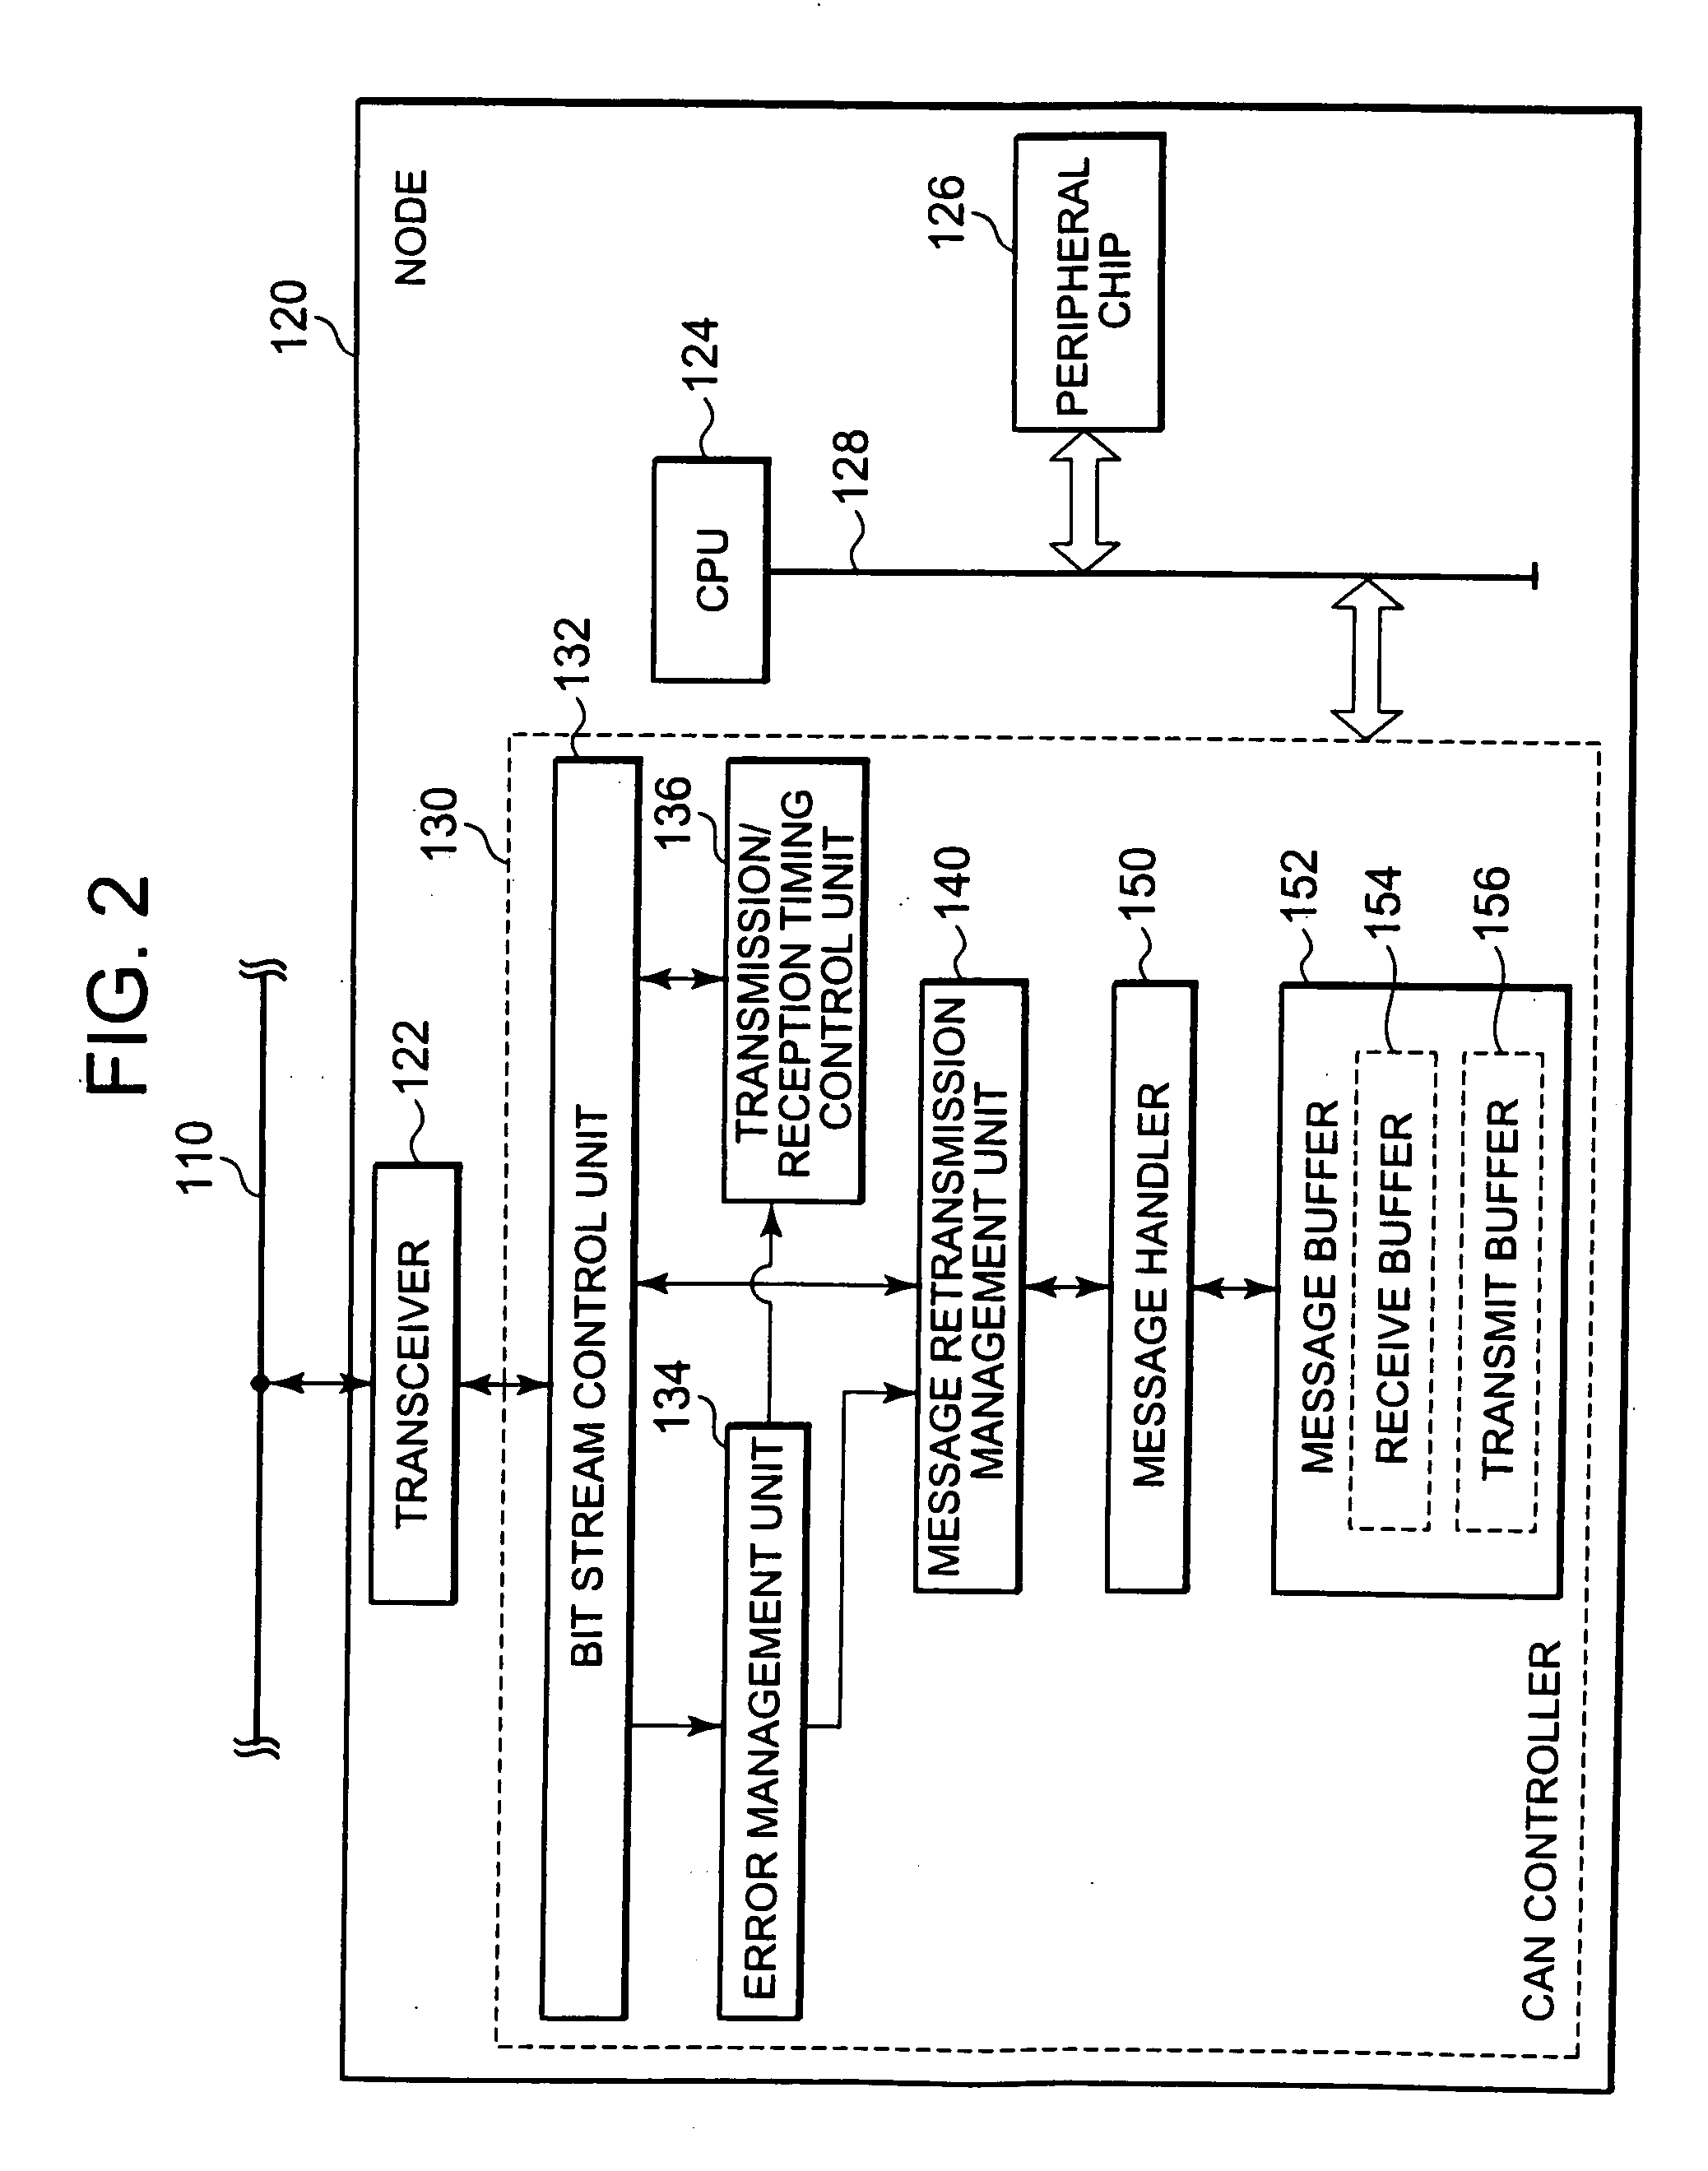 CAN node, and communication method of communication system including CAN node